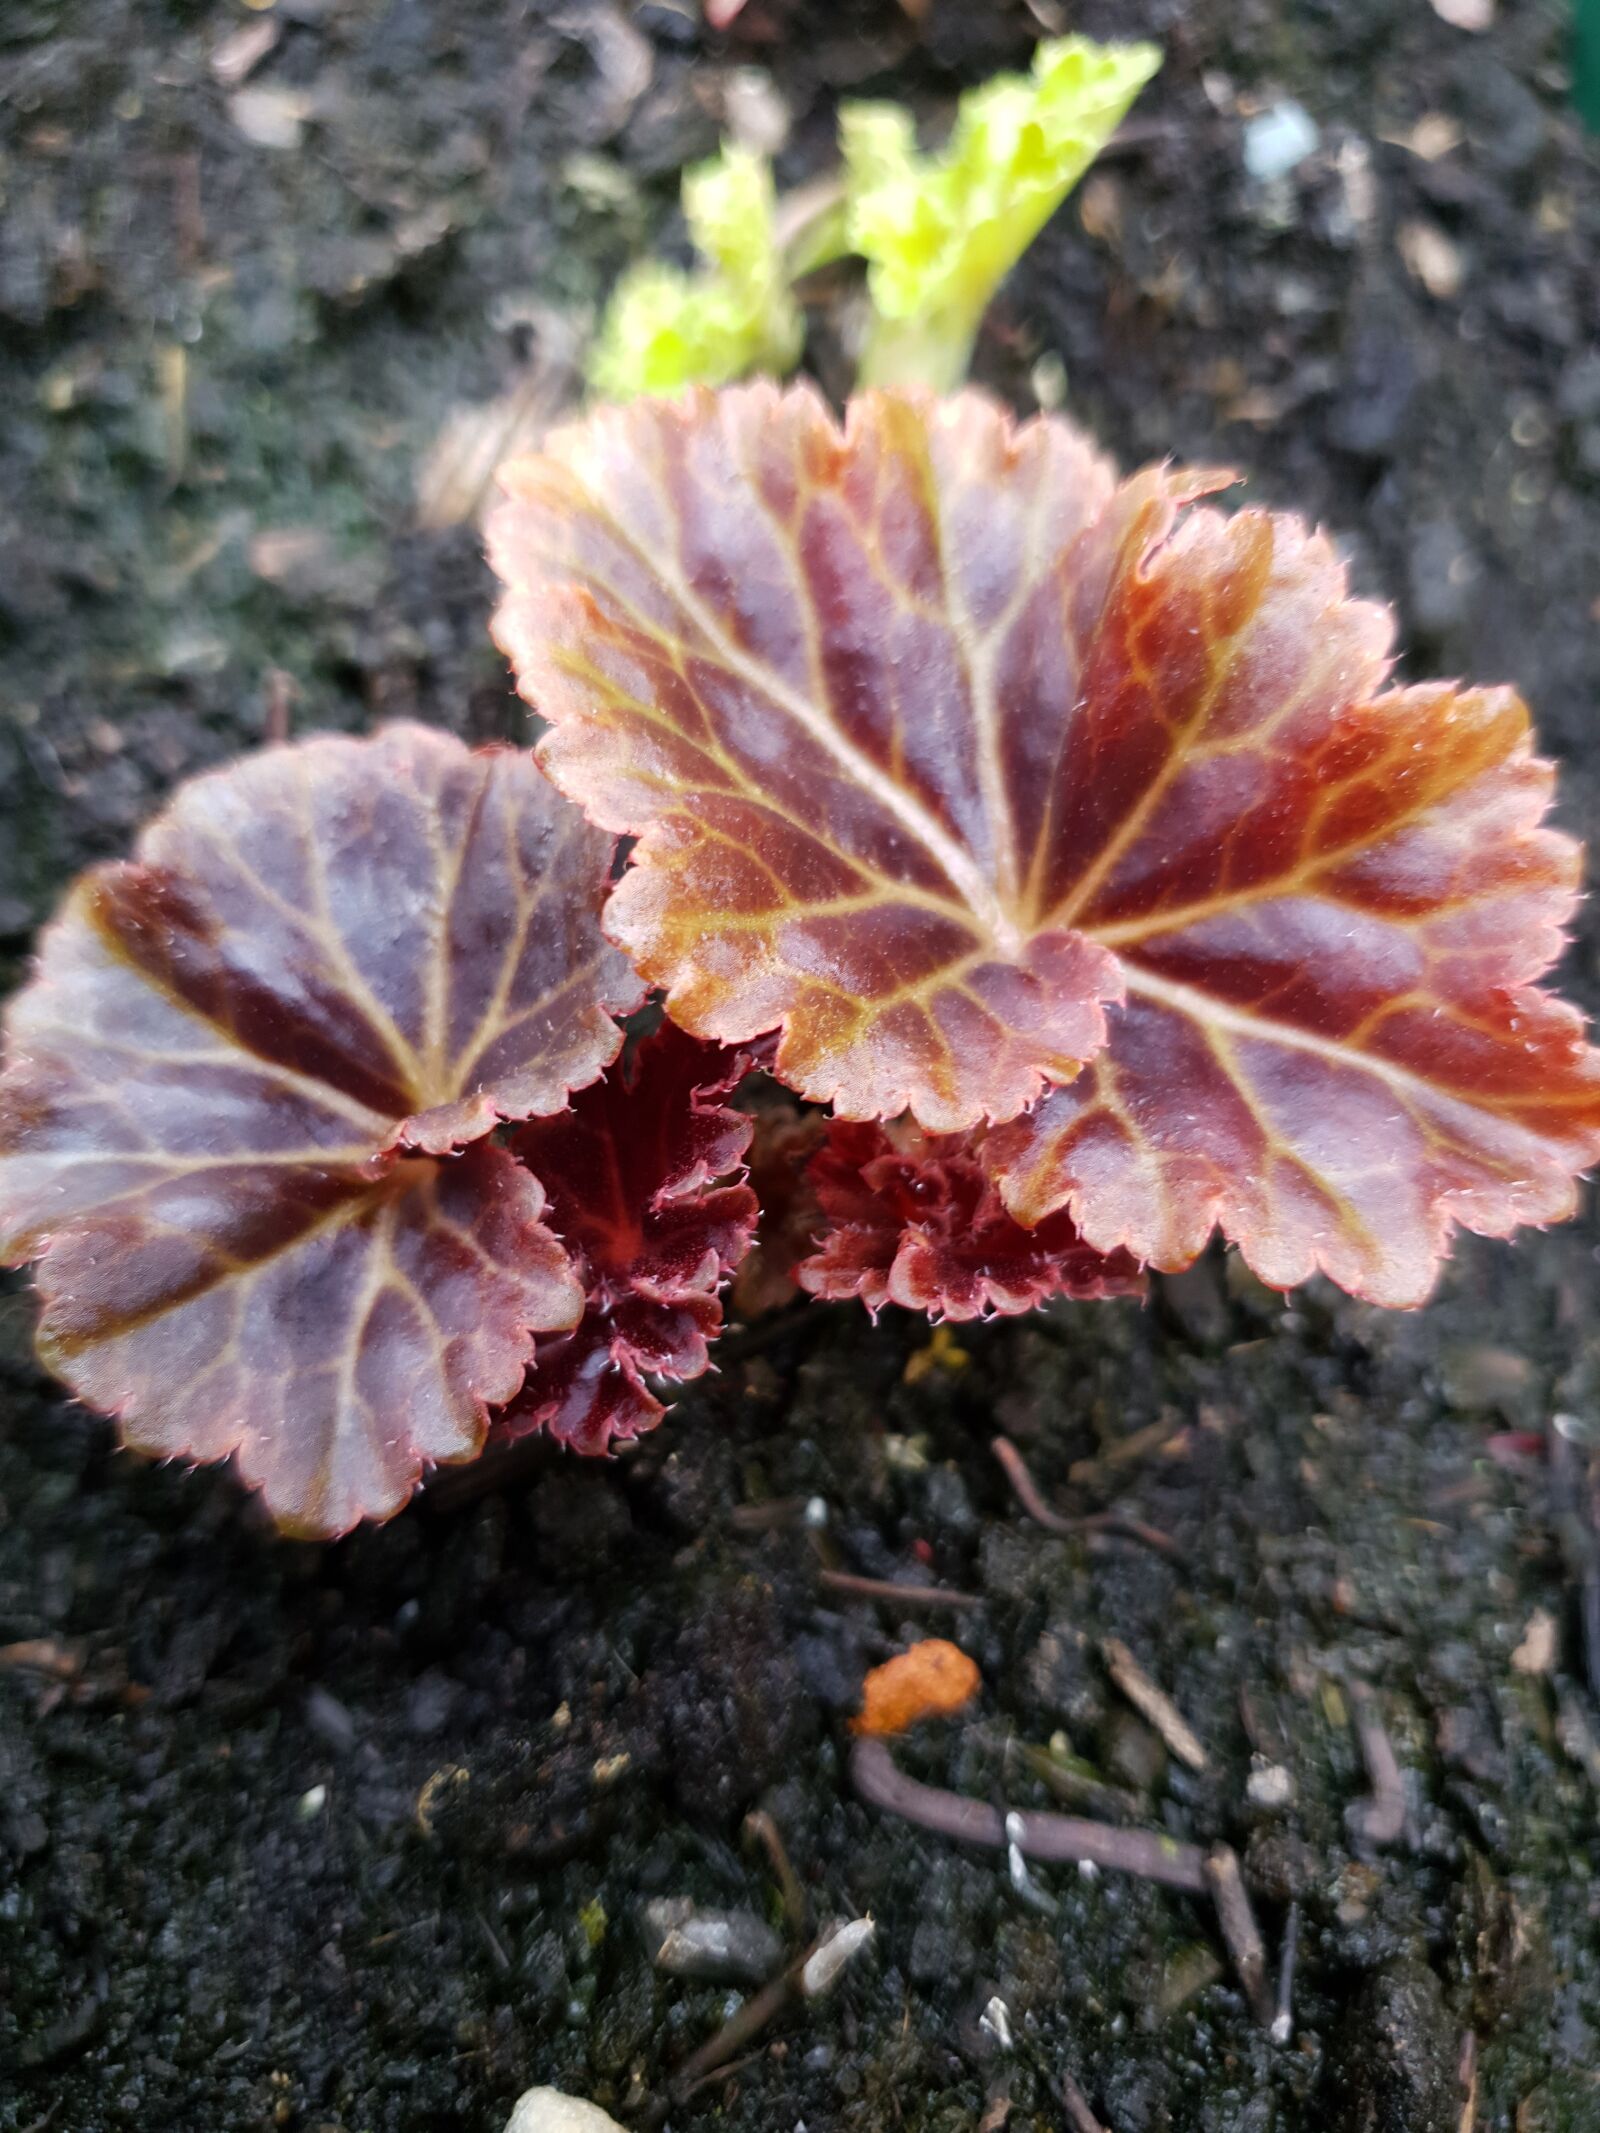 Samsung Galaxy S10 sample photo. Dahlia, earth, after the photography